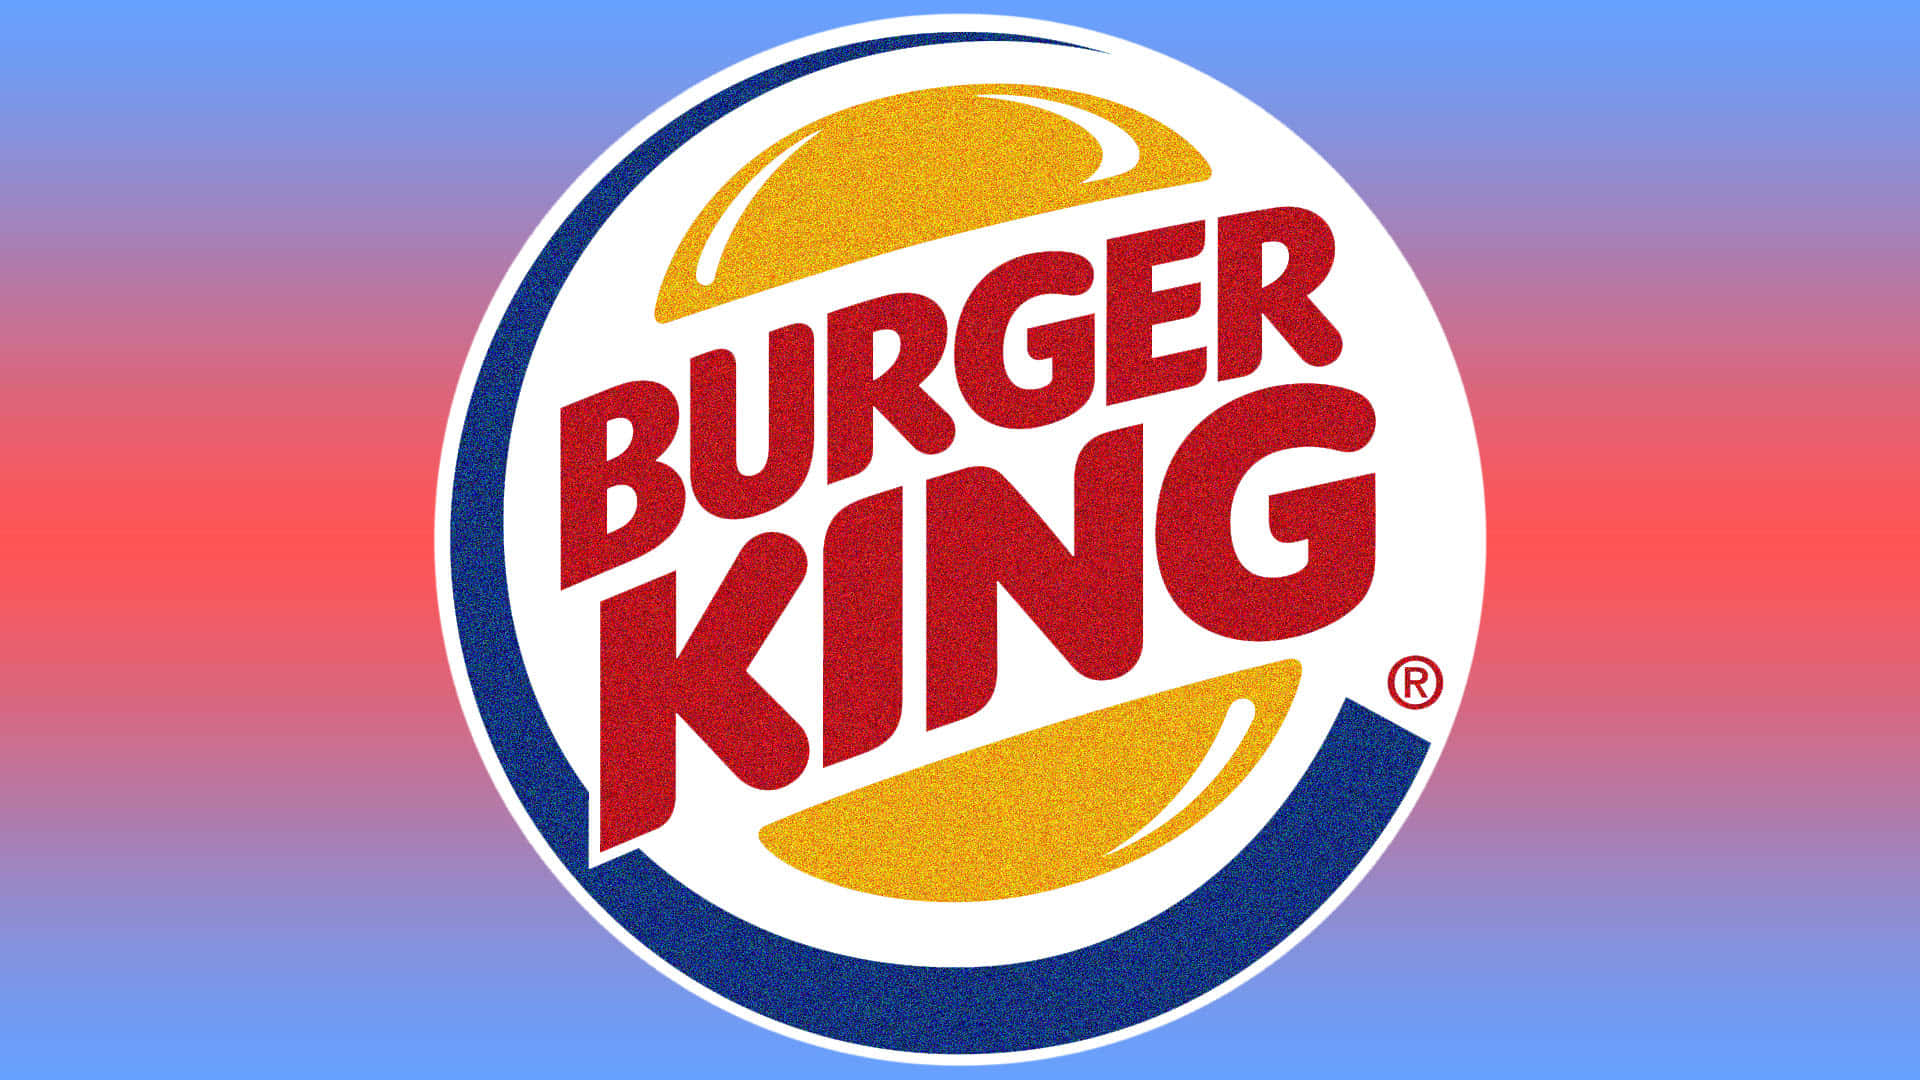 Come in for Freshly Cooked Burgers at Burger King